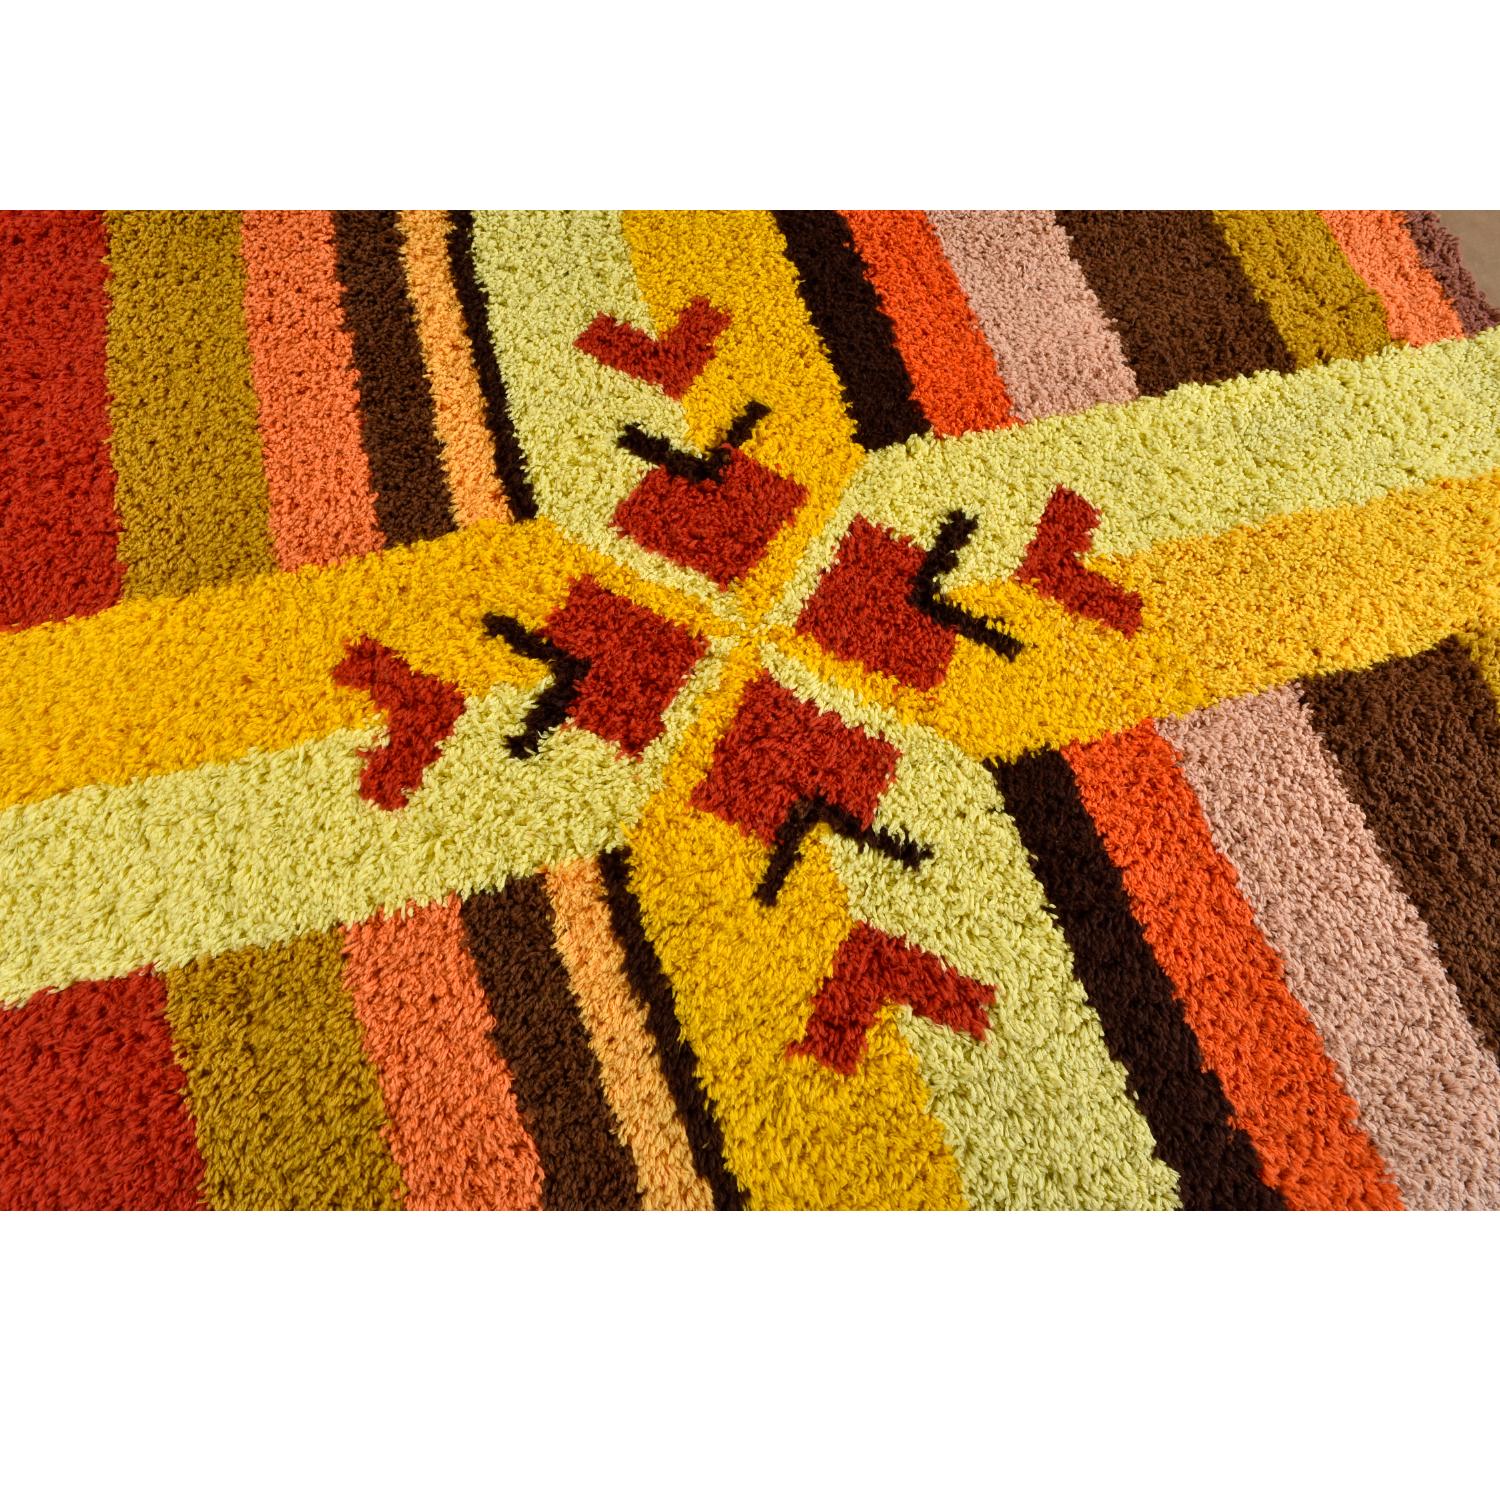 Red Yellow Orange and Brown Vintage Rya Rug Wall Hanging In Excellent Condition For Sale In Chattanooga, TN